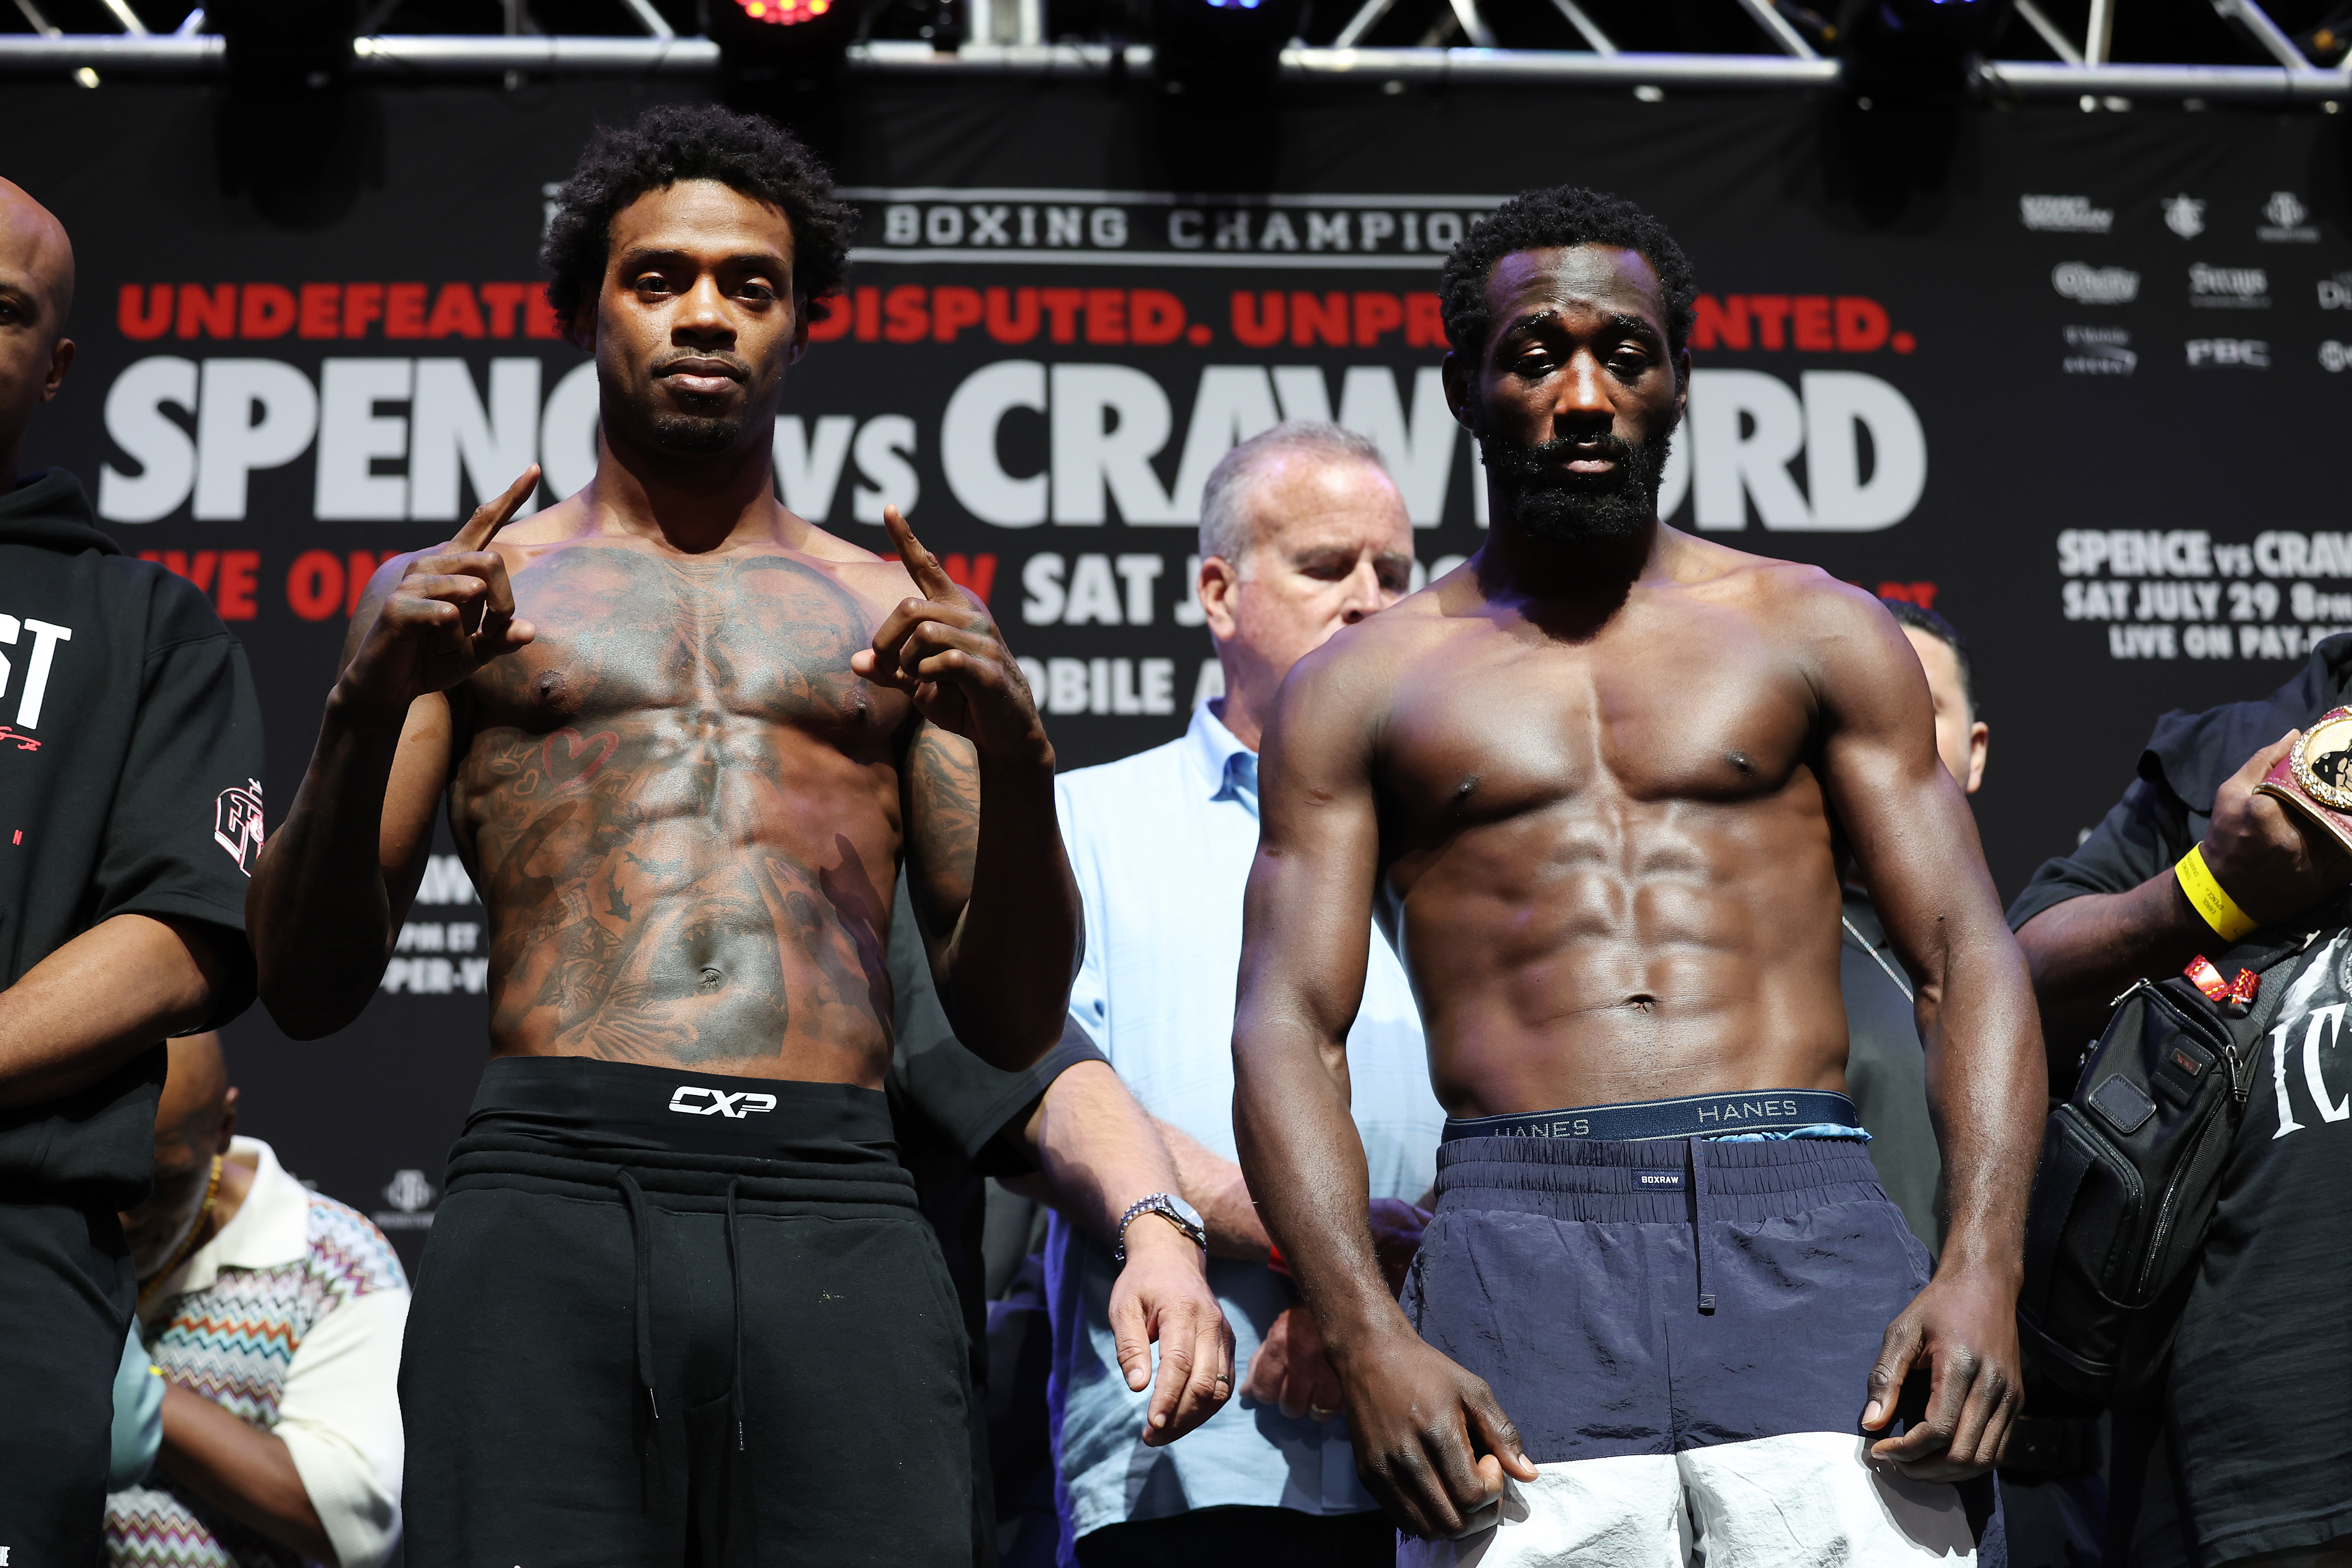 Errol Spence Jr. and Terrence Crawford pose during their weigh-in at T-Mobile Arena on July 28, 2023. Spence Jr. and Crawford will fight for the undisputed world welterweight championship at T-Mobile Arena in Las Vegas on July 29.